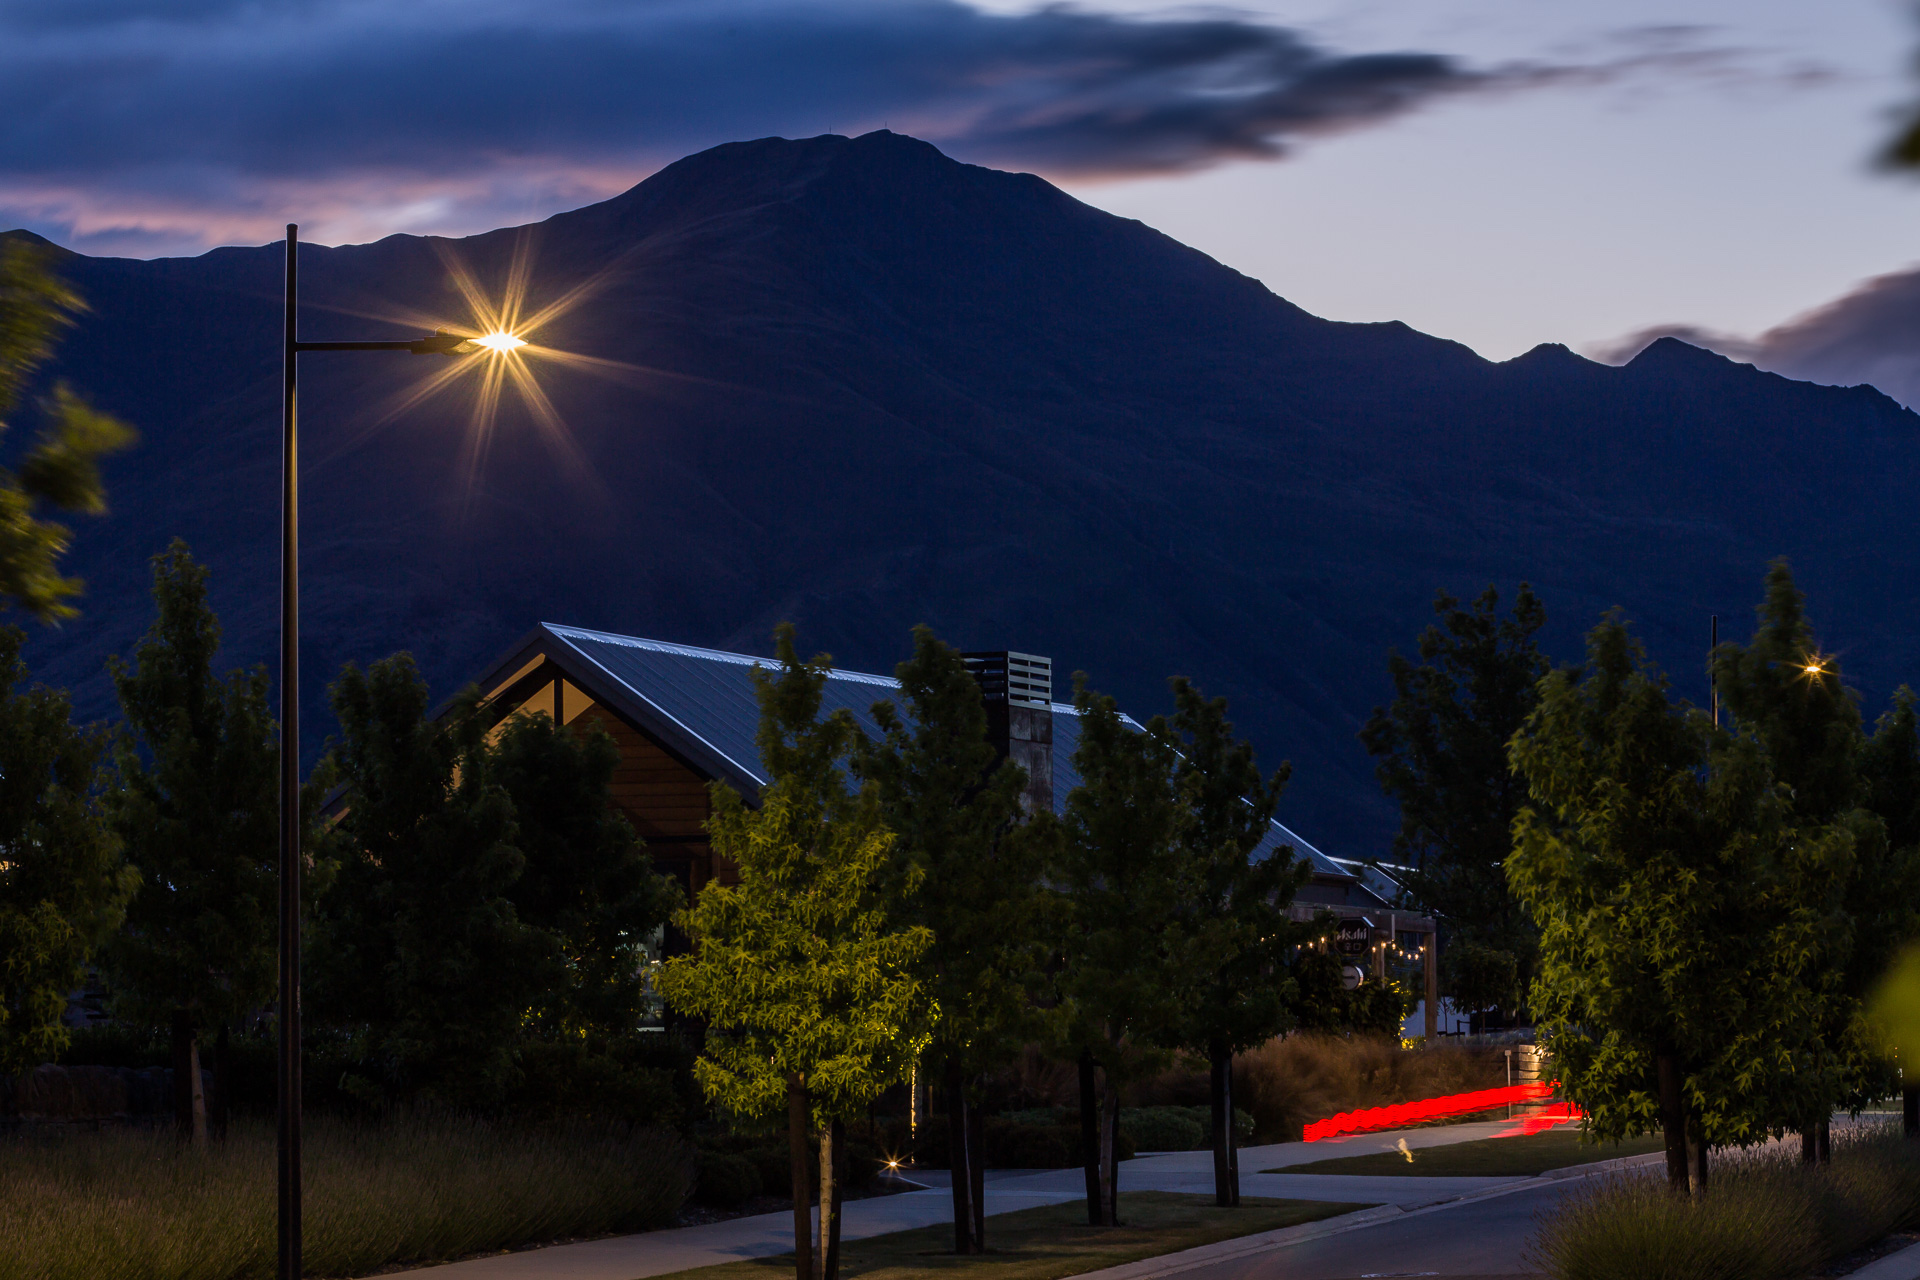 Northlake neighbourhood pathway at night illuminated by ibex lighting solutions with magnificent mountain in the background.